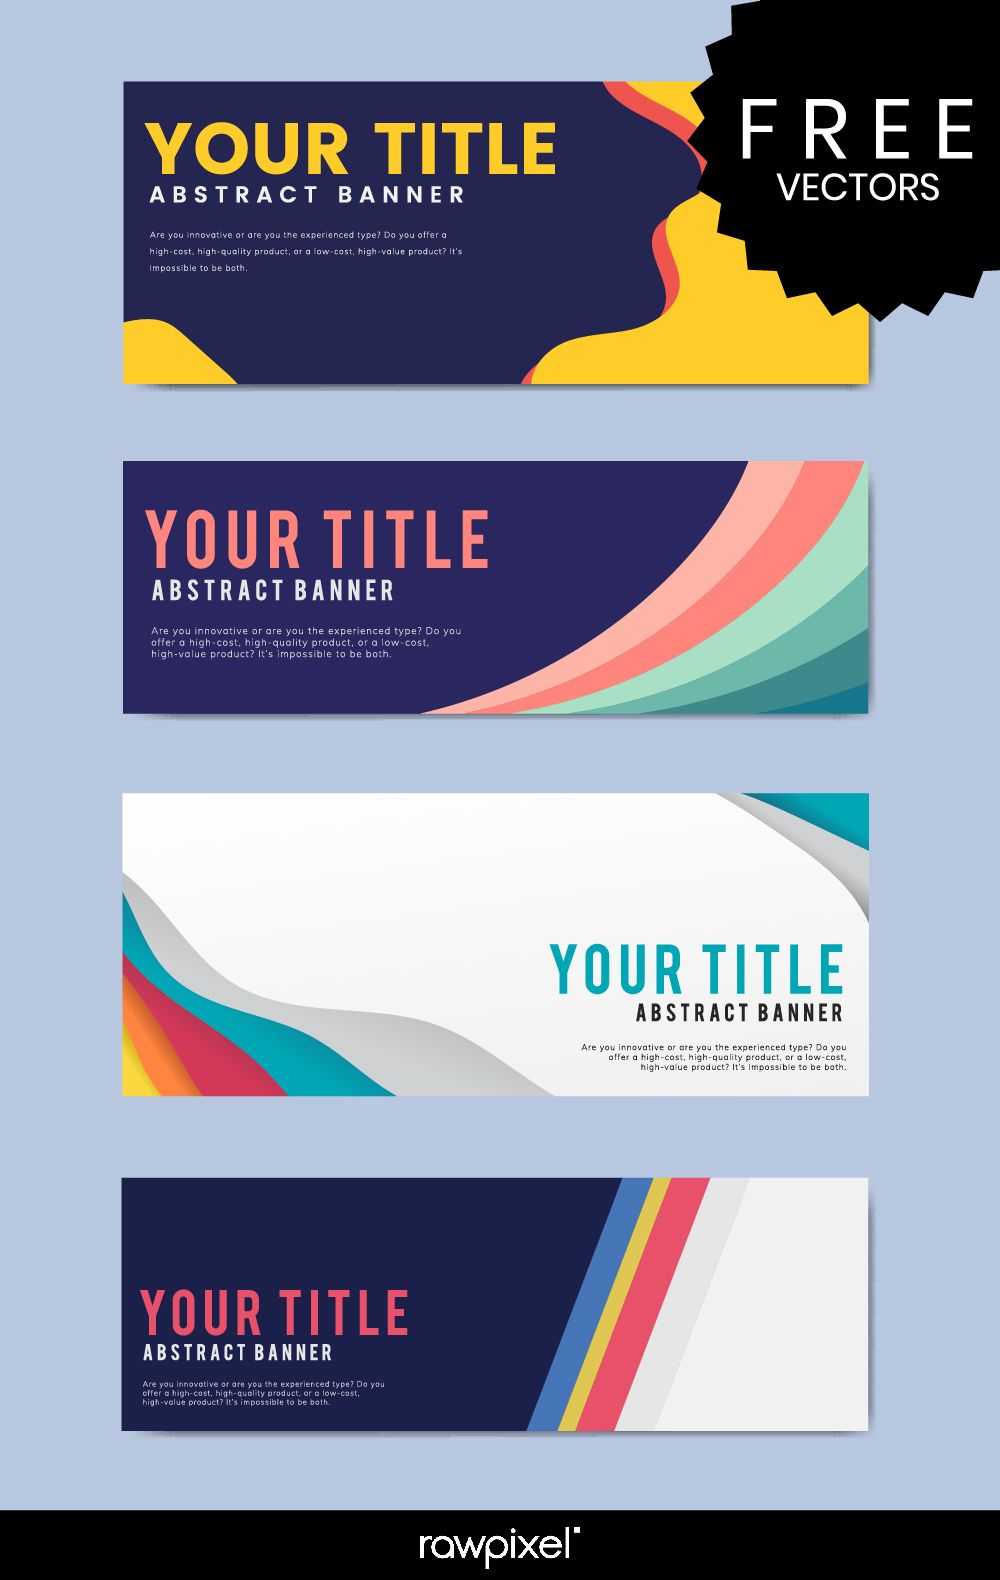 Download Free Modern Business Banner Templates At Rawpixel With Website Banner Templates Free Download